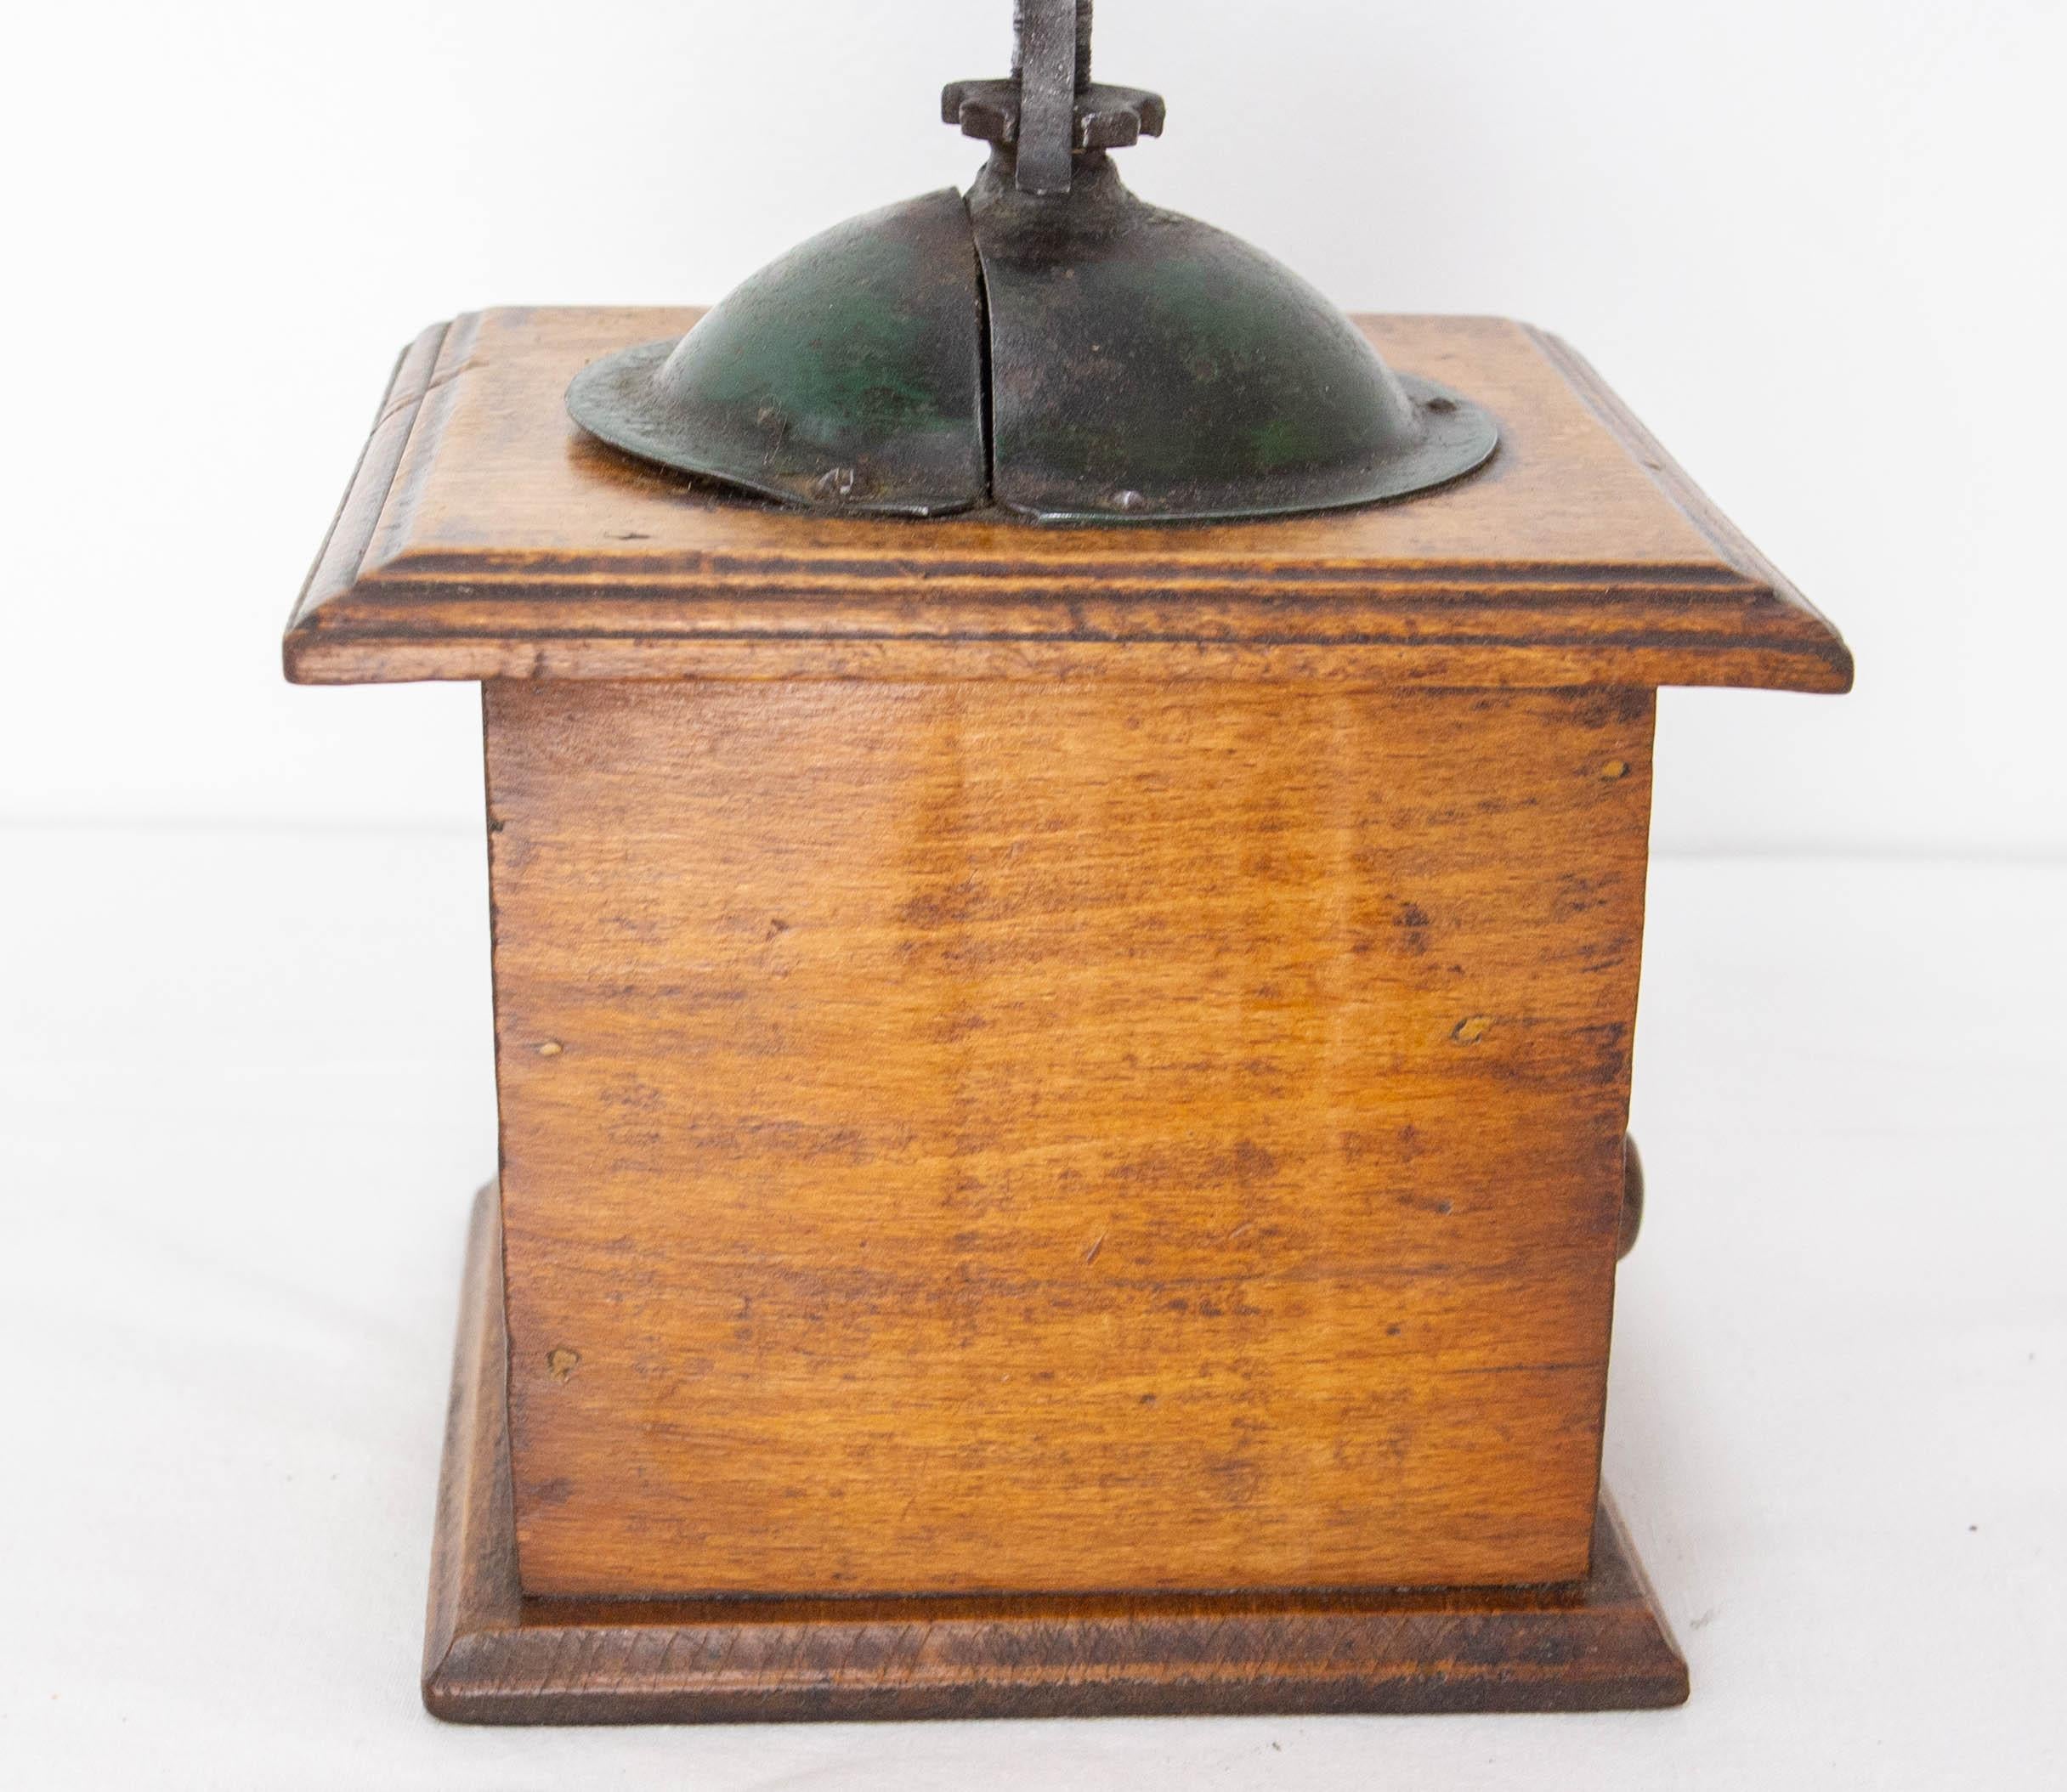 20th Century French Coffee Grinder with Drawer, Iron and Wood, circa 1900